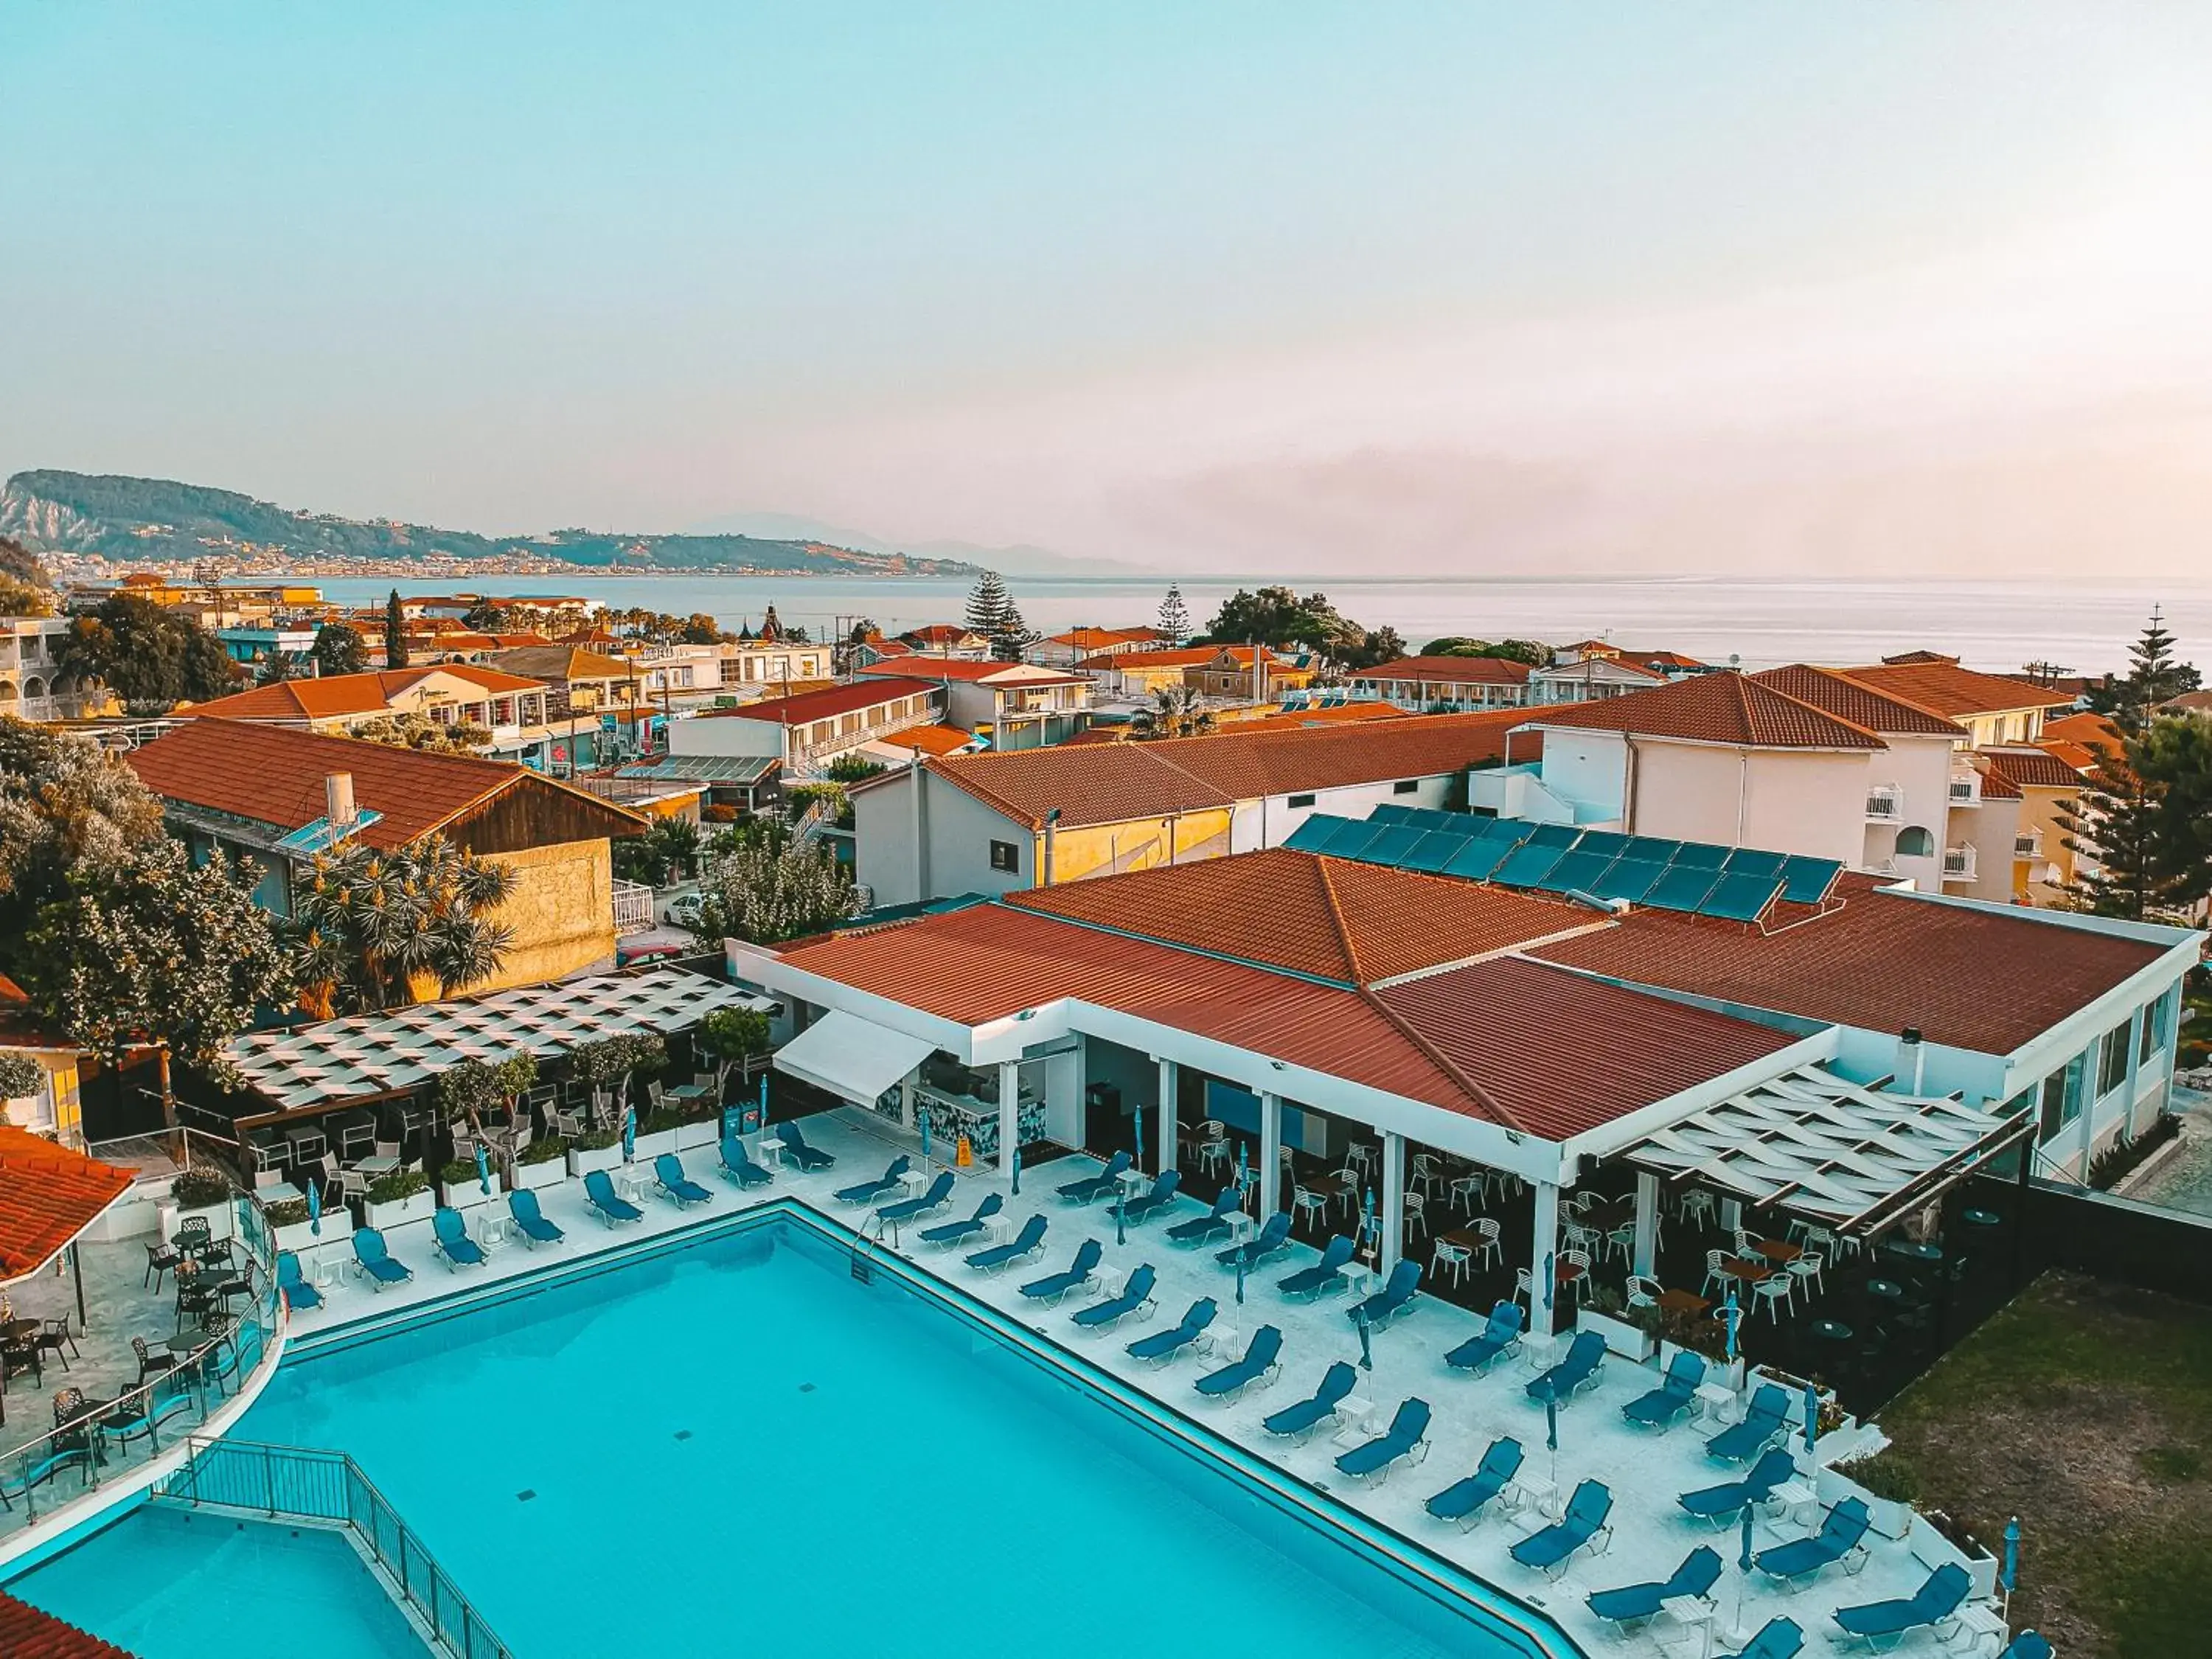 Bird's eye view, Pool View in Diana Palace Hotel